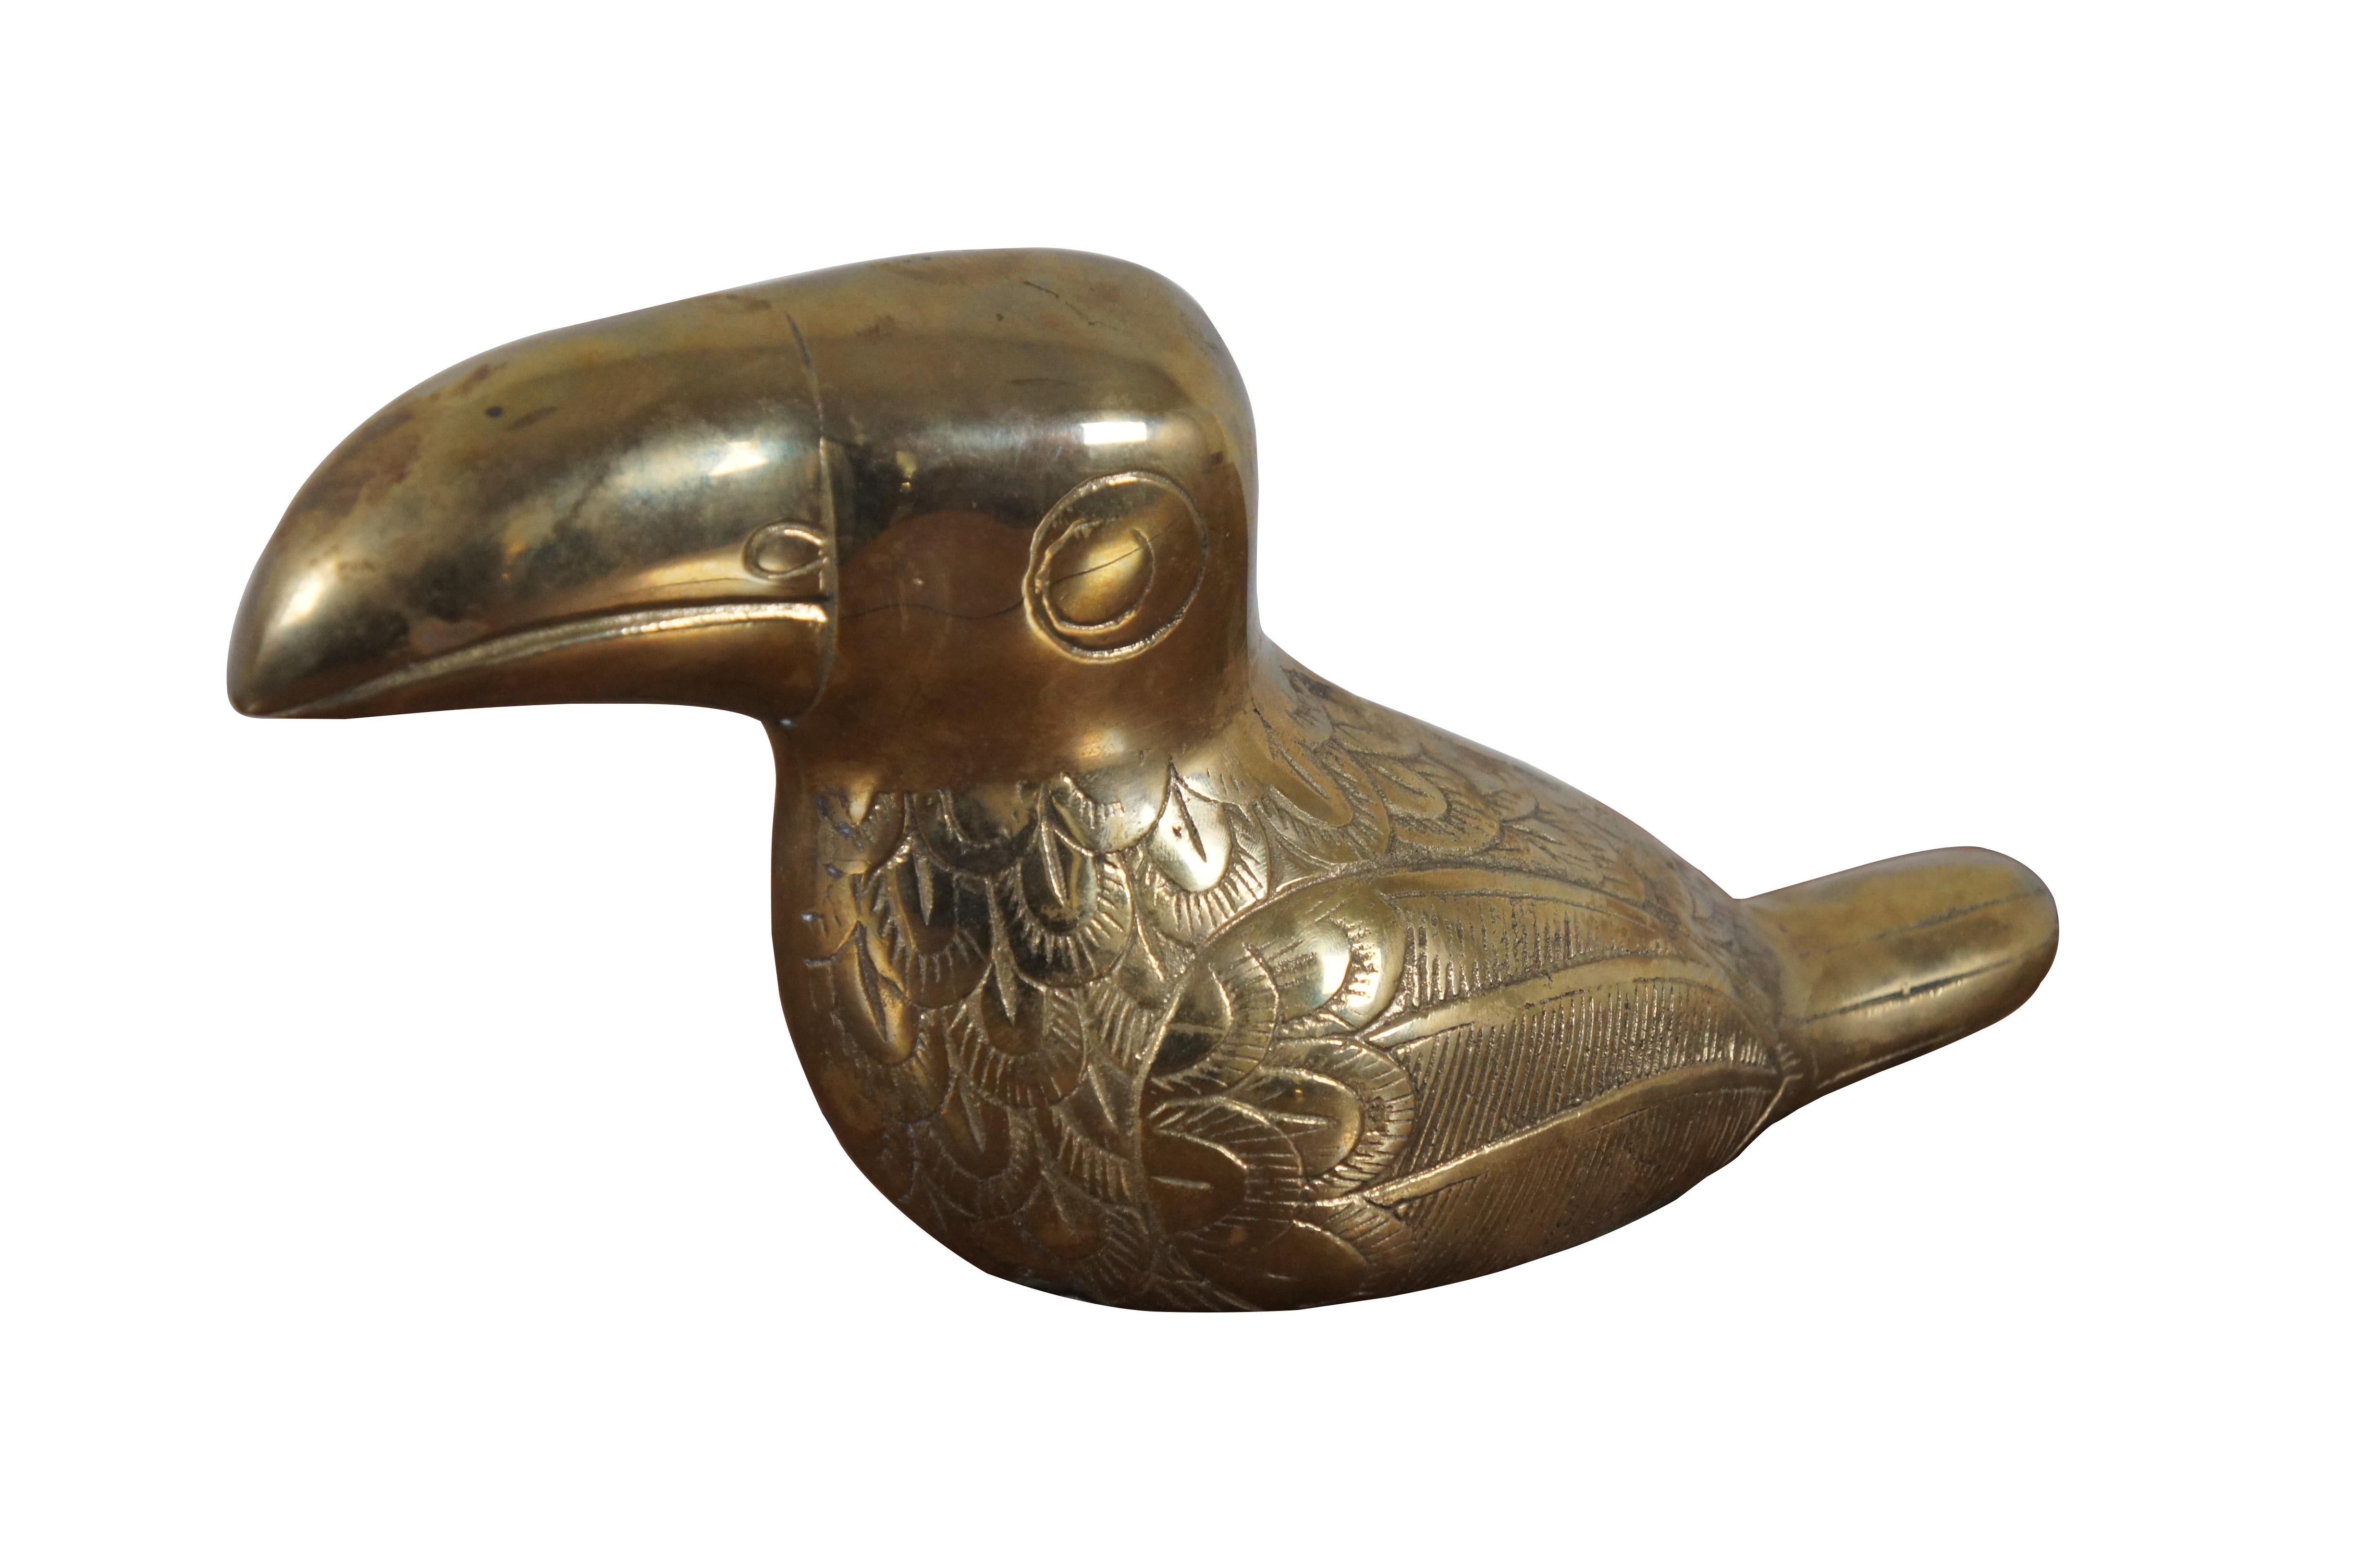 Vintage brass and copper figurine / sculpture in the shape of a toucan / parrot / bird, by Dolbi Cashier for Castilian Imports. Made in Korea.

Dimensions:
11